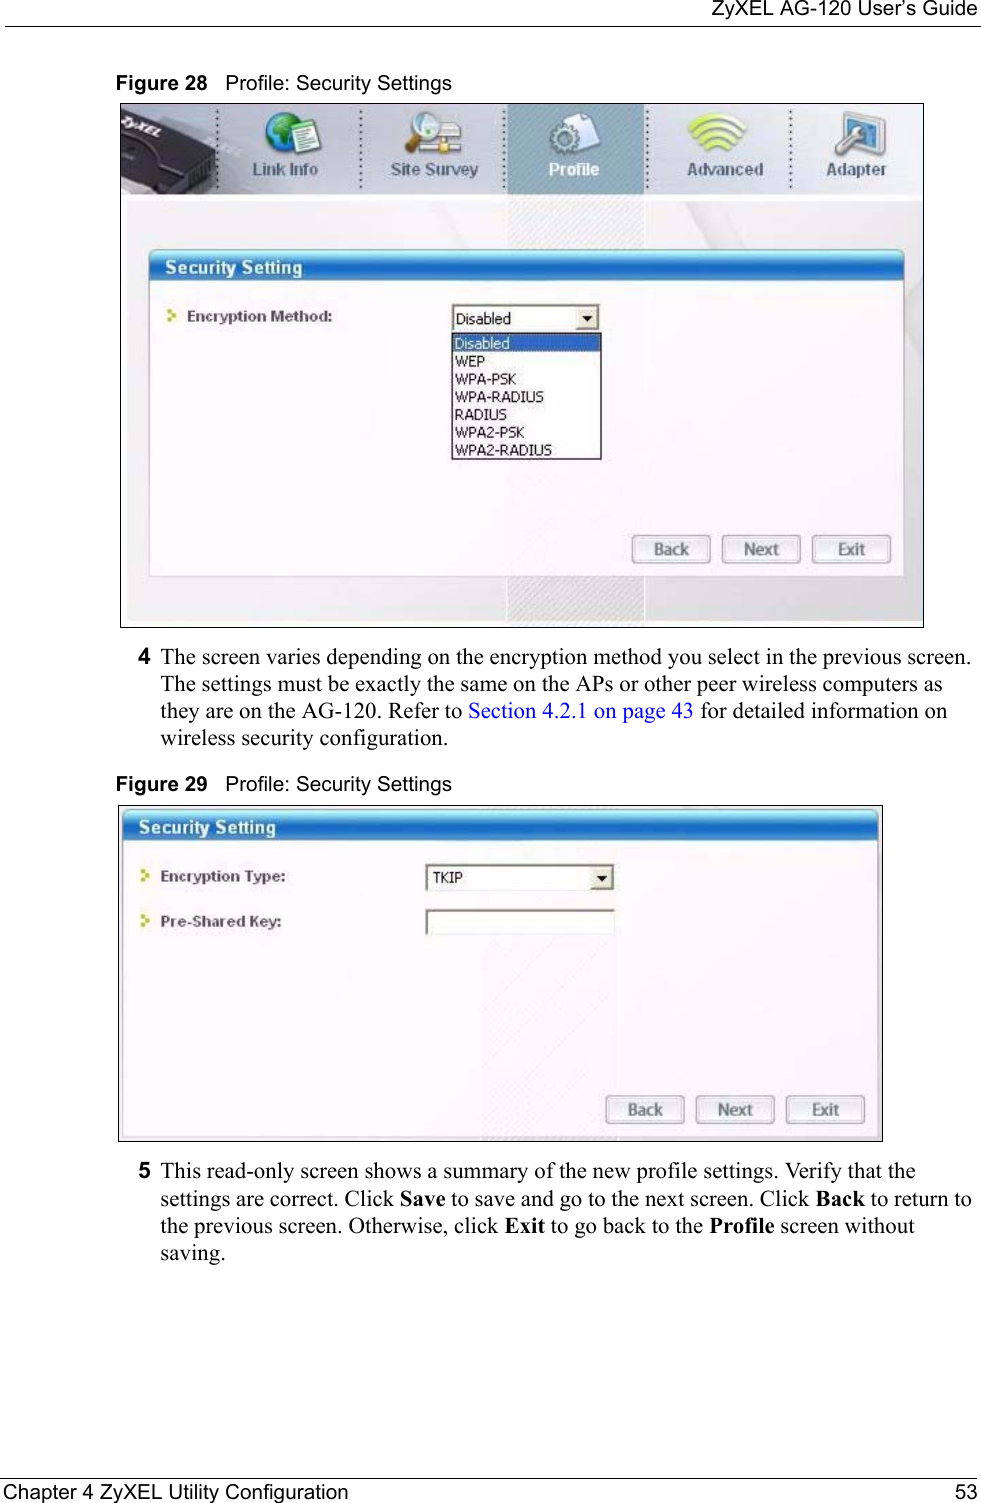 ZyXEL AG-120 User’s GuideChapter 4 ZyXEL Utility Configuration 53Figure 28   Profile: Security Settings 4The screen varies depending on the encryption method you select in the previous screen. The settings must be exactly the same on the APs or other peer wireless computers as they are on the AG-120. Refer to Section 4.2.1 on page 43 for detailed information on wireless security configuration.Figure 29   Profile: Security Settings 5This read-only screen shows a summary of the new profile settings. Verify that the settings are correct. Click Save to save and go to the next screen. Click Back to return to the previous screen. Otherwise, click Exit to go back to the Profile screen without saving.